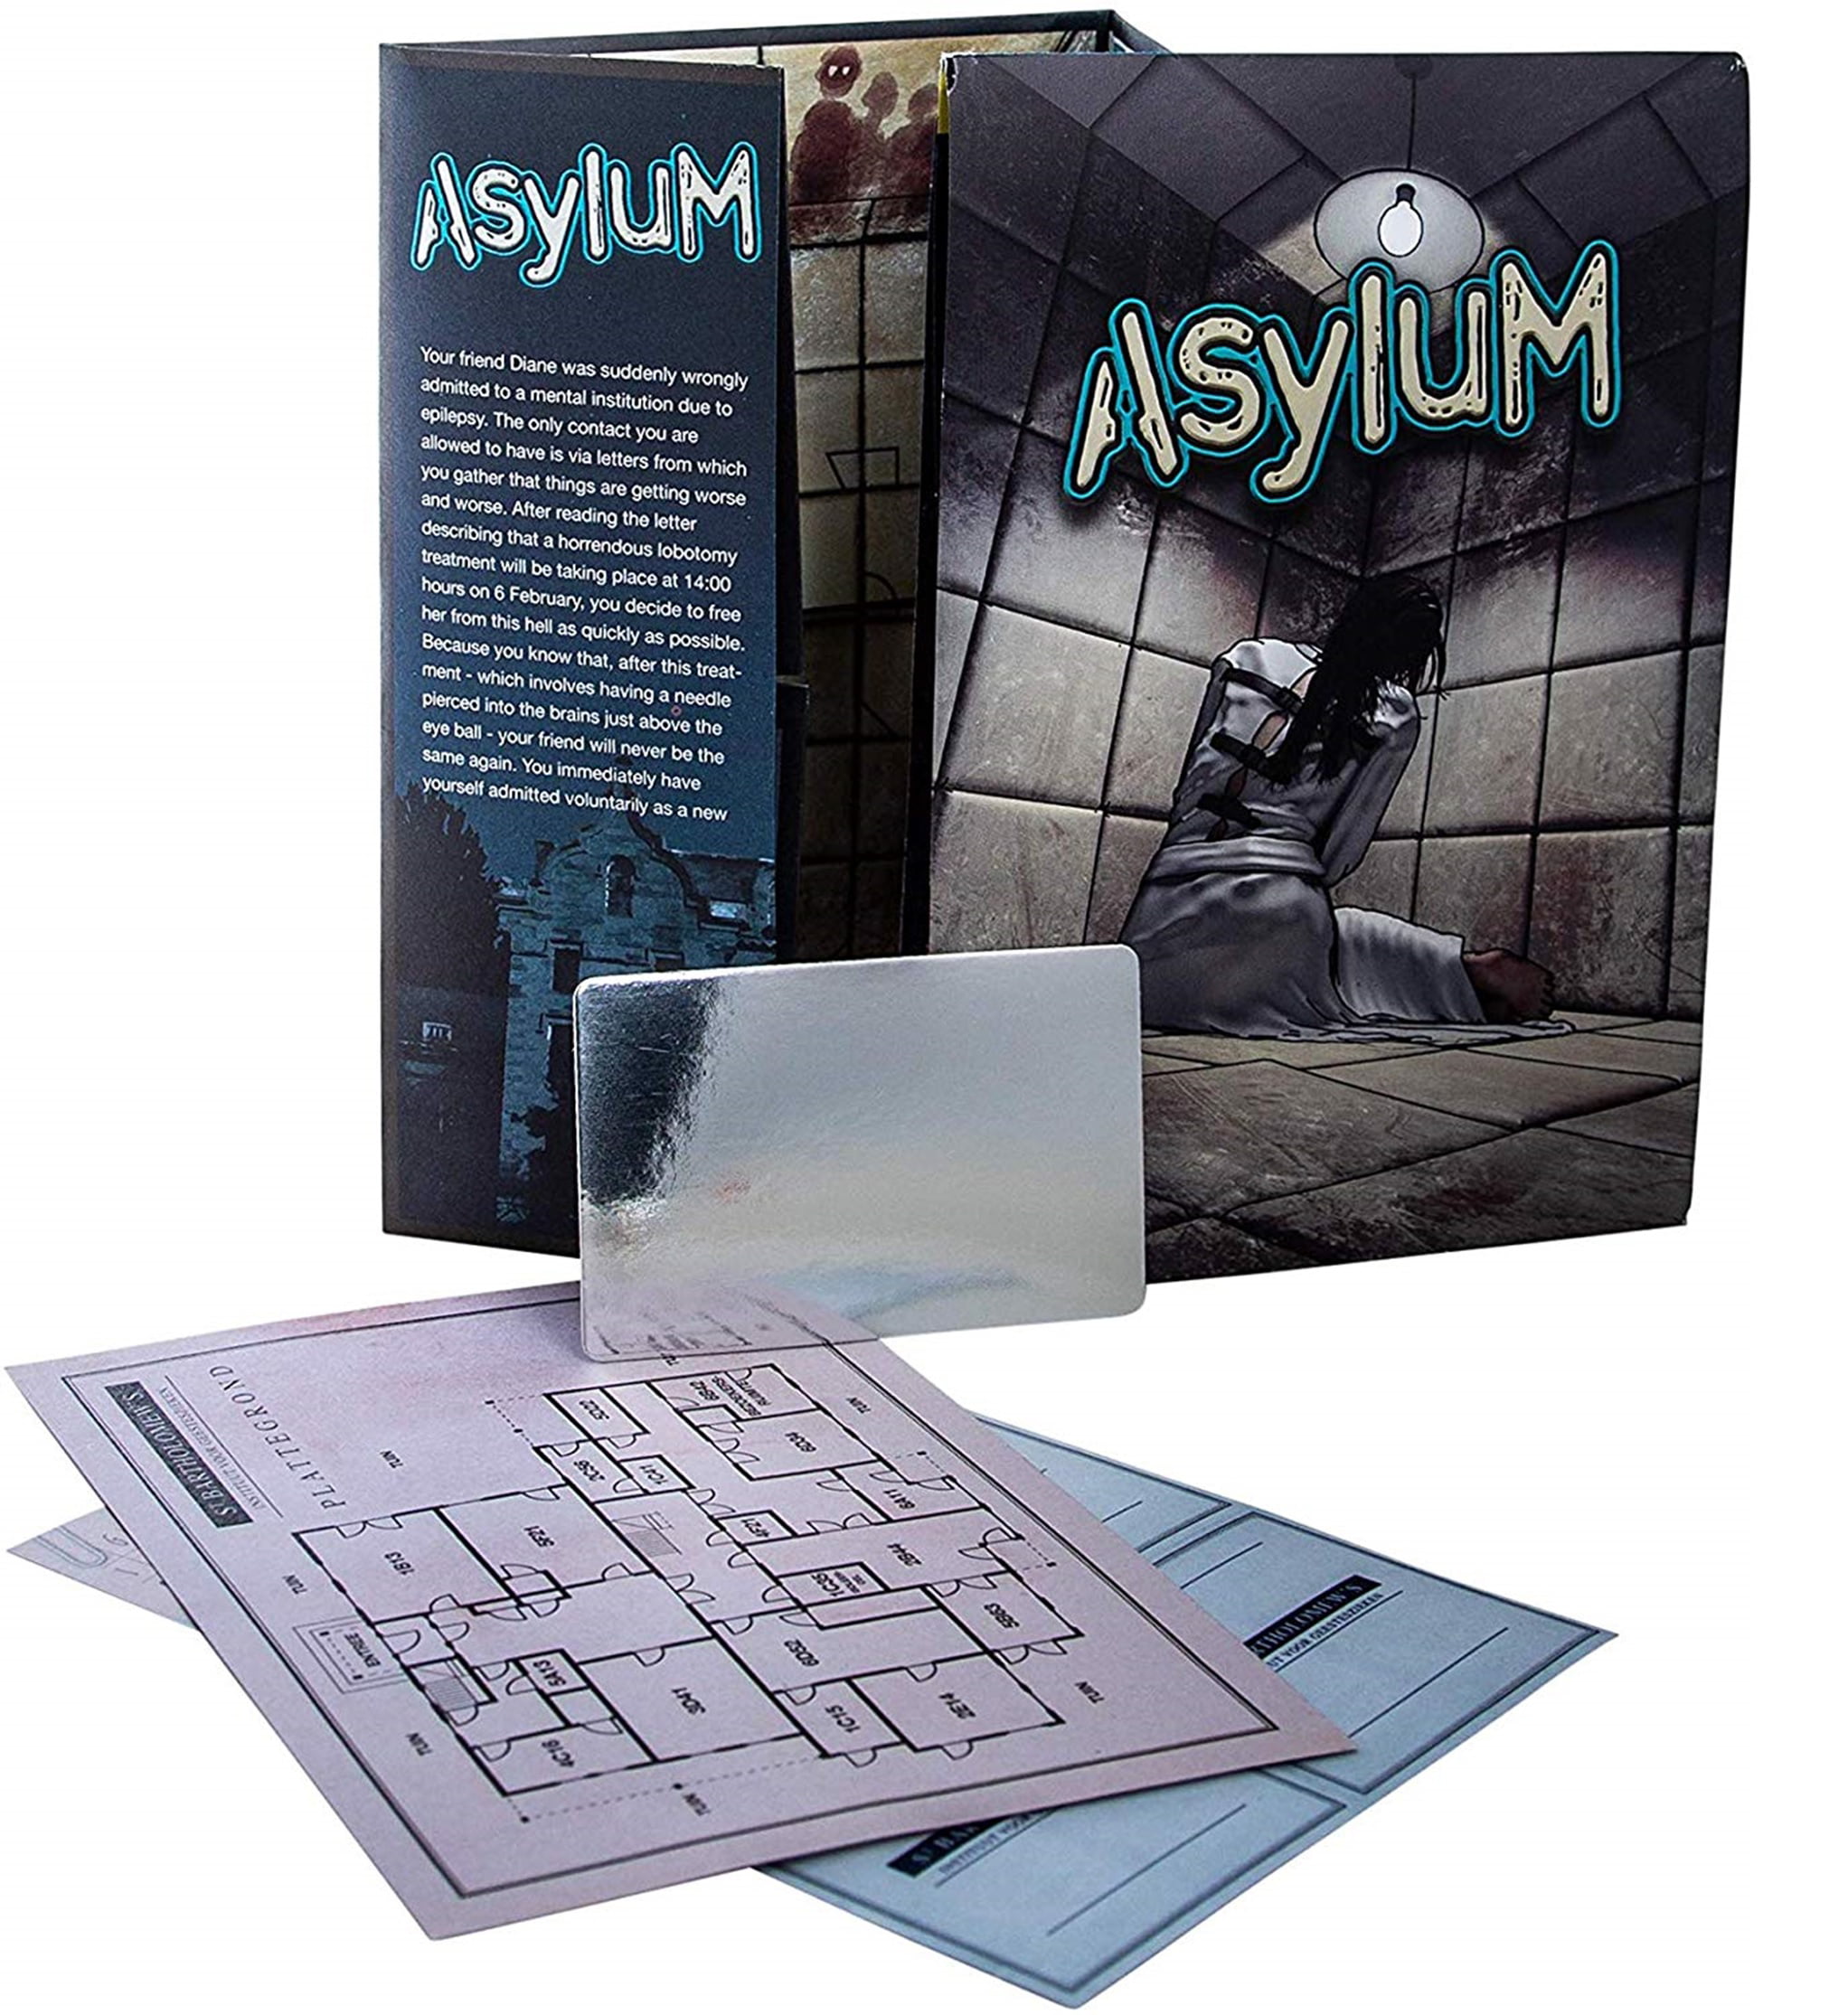  Escape Room The Game – 2 Player Horror Edition with 2 Games   Solve The Mystery Board Game for Adults and Teens : Identity Games  [www.identity games.com]: Toys & Games